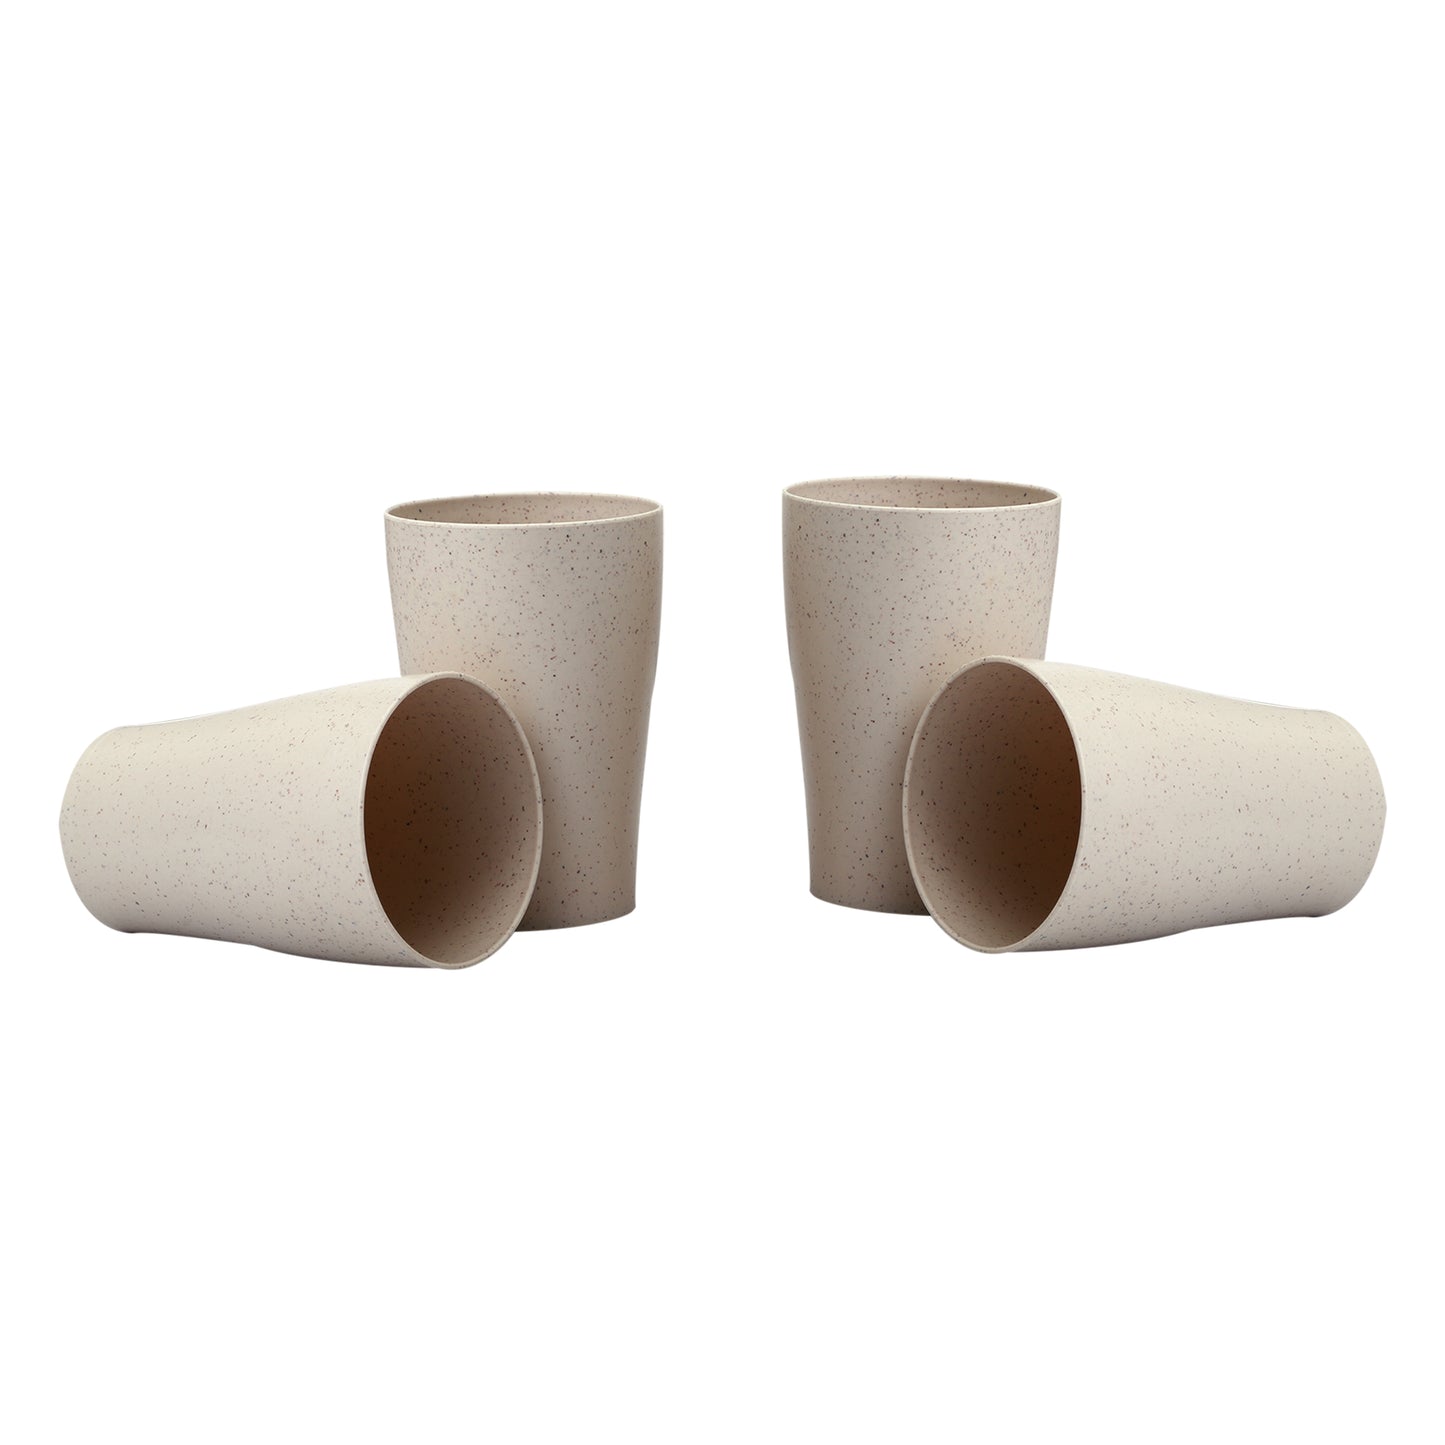 Wheat Straw Cups - Set of 4